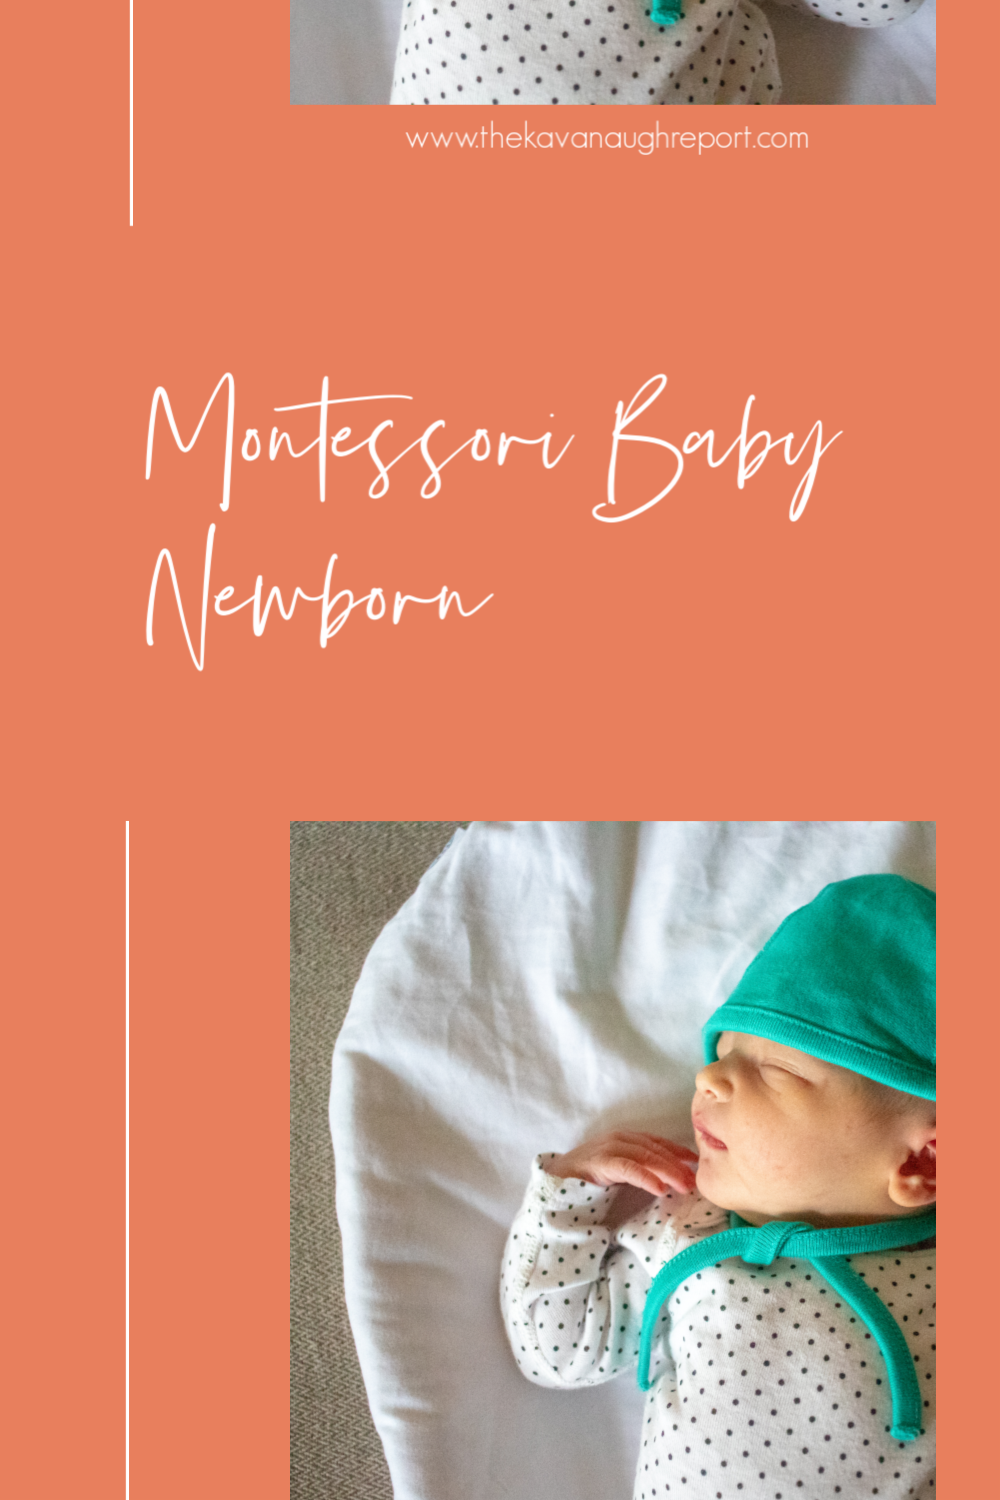 Start your baby off with Montessori from birth with these helpful articles, tips, and activities to prepare yourself for a Montessori newborn.